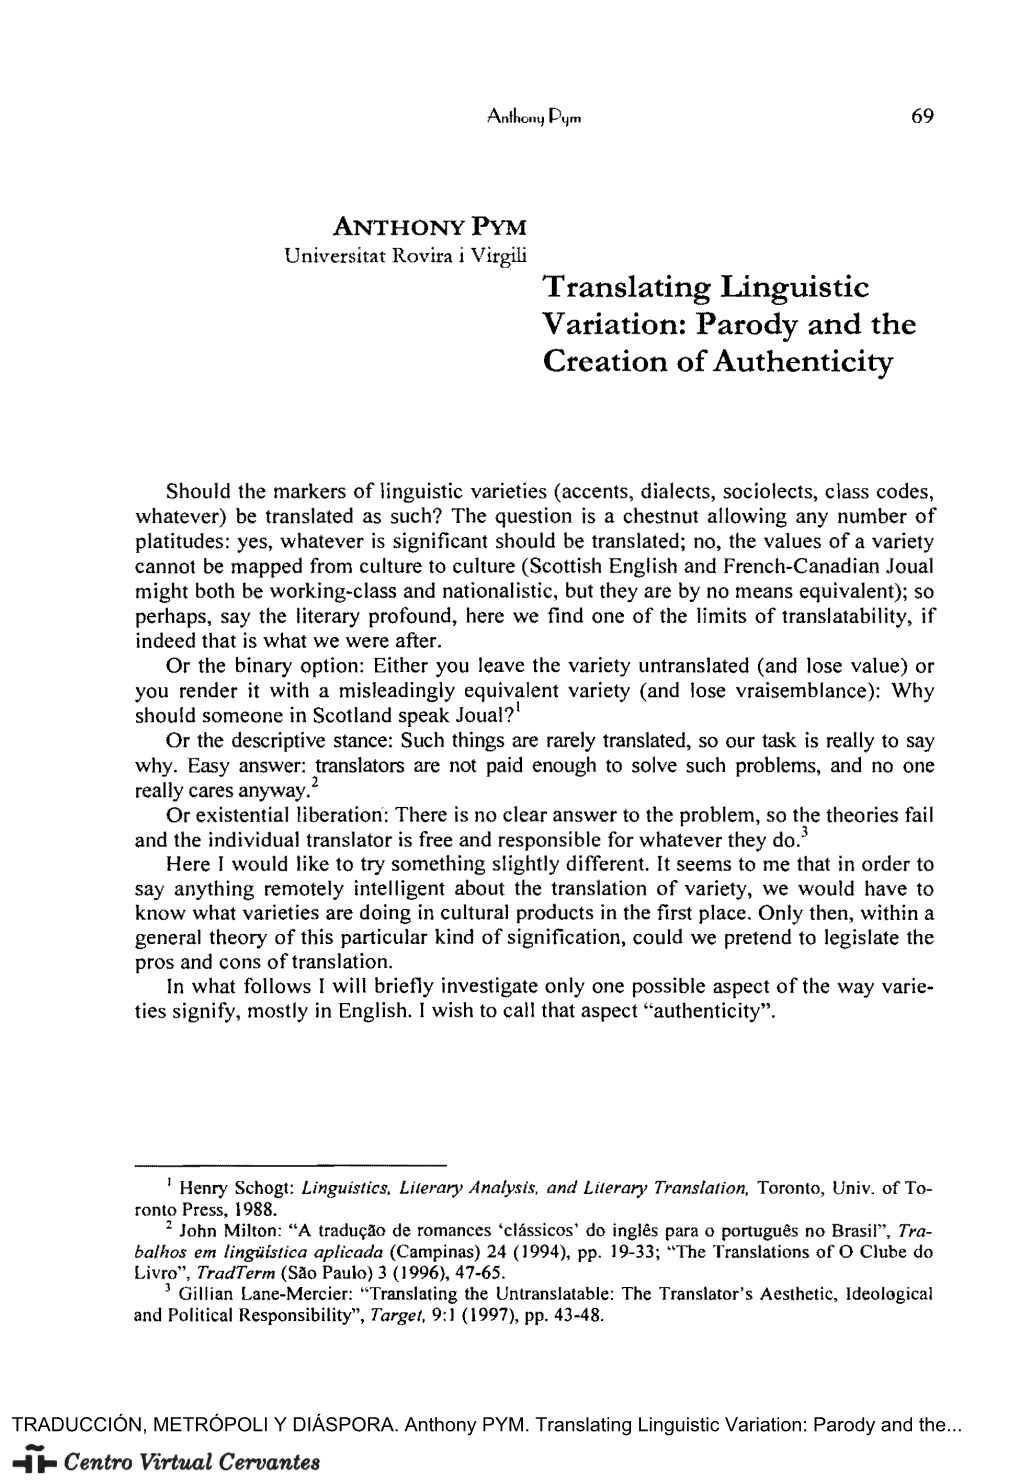 Translating Linguistic Variation: Parody and the Creation of Authenticity